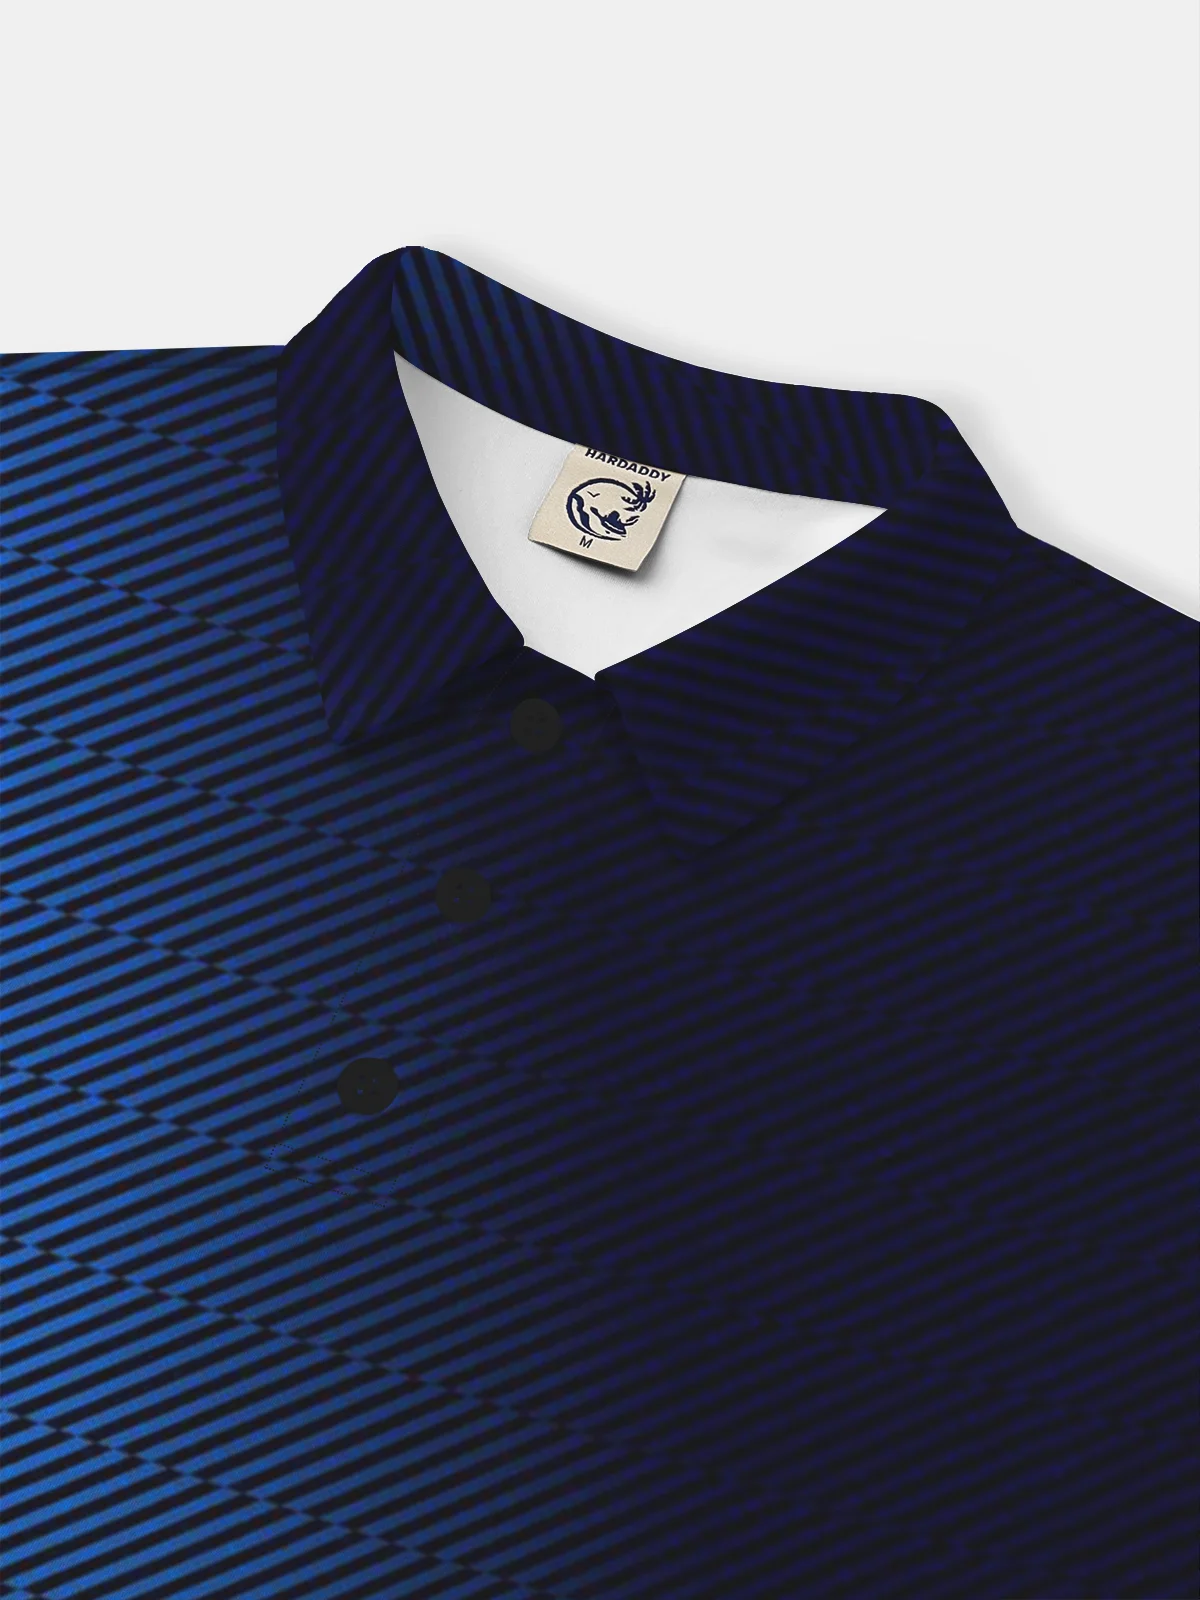 Hardaddy Moisture Wicking Golf Polo 3D Abstract Gradient Geometry